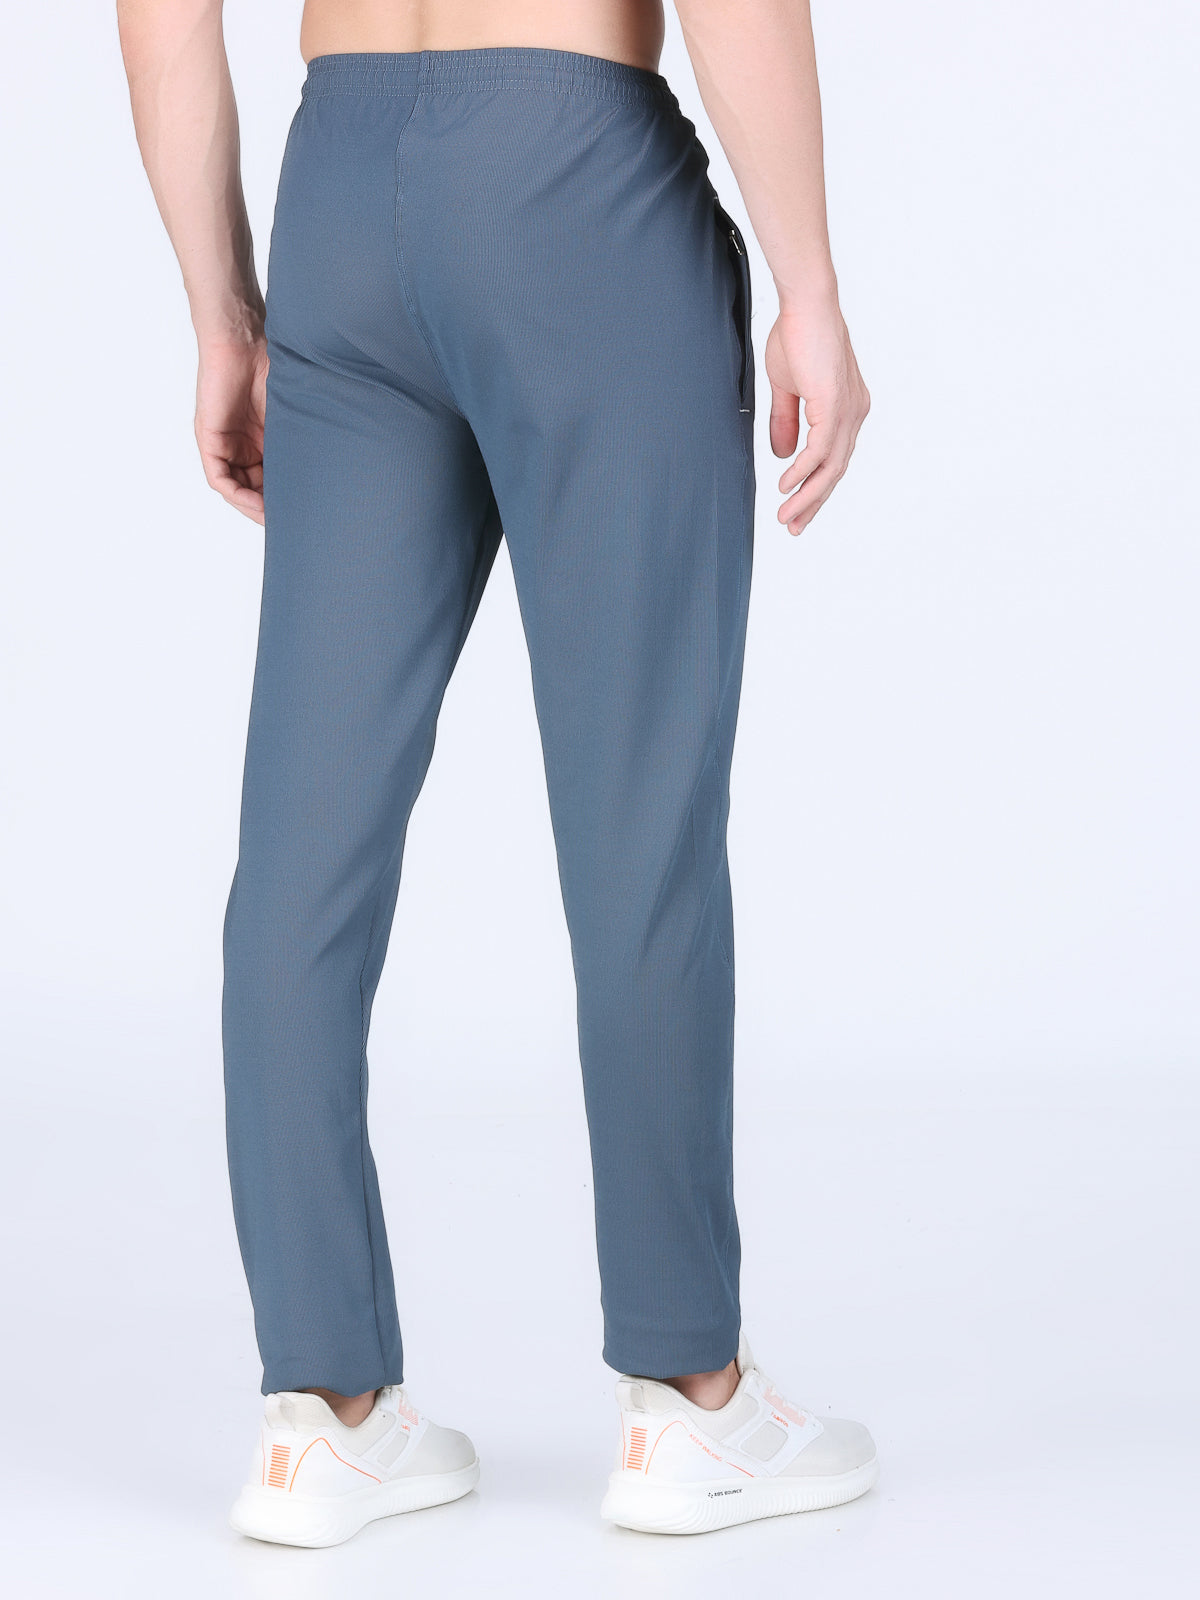 Combo of 2 Men's 4 Way Stretch Lining Dark Grey and CoffeeTrack Pant